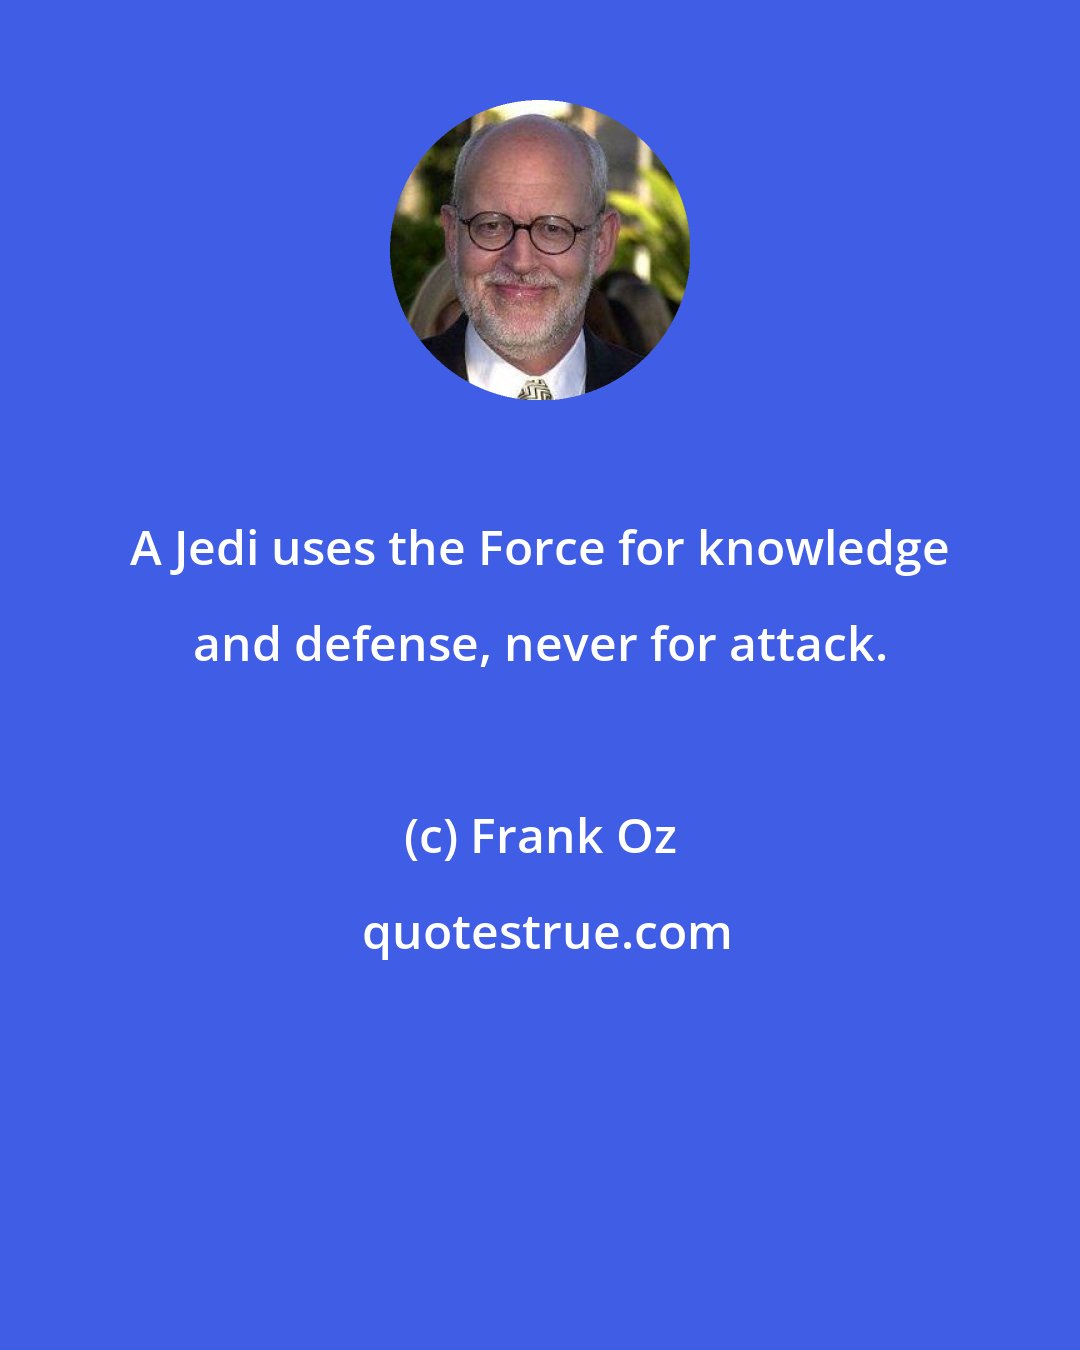 Frank Oz: A Jedi uses the Force for knowledge and defense, never for attack.